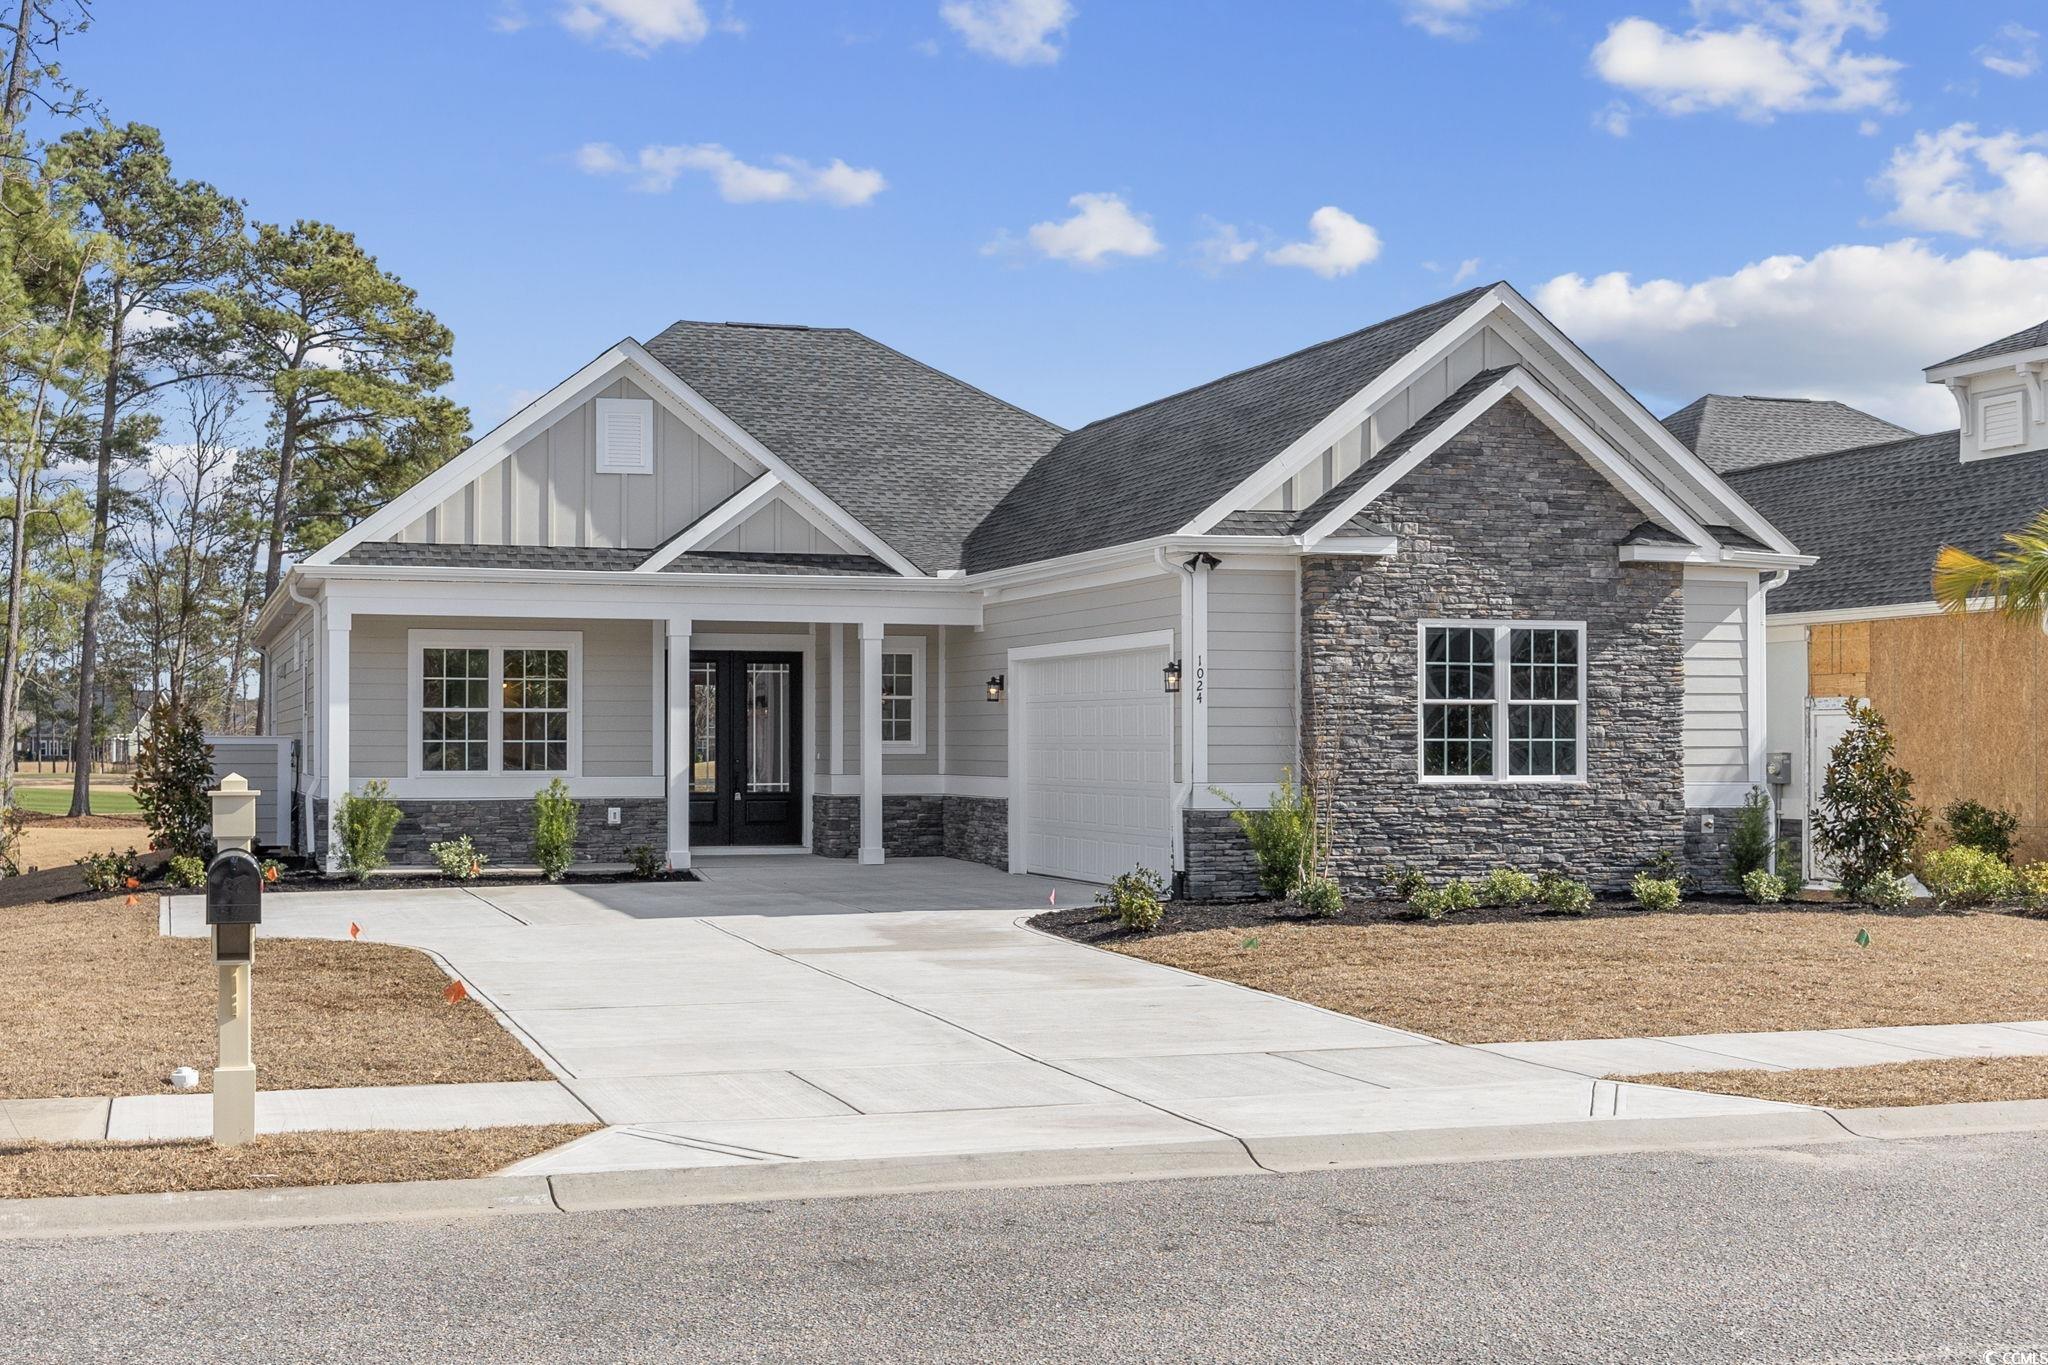 this beautiful golf course/water lot home is now completed on 2/1/2024 in the wild wing plantation community! as you will enter this perfectly laid out open floor plan home will notice right away the upgrades and quality of work are above and beyond other larger builders in the area. this is a 100% custom home and it shows!. with lvp flooring throughout, hardie board siding, upgraded countertops, soft close all wood cabinets, all showers are tile including a large shower tub combination in the master bathroom, custom wood shelving in your oversized master walk in closet, large tray ceilings, crown molding and upgraded lighting. this golf course lot is perfectly situated on hole #1 with gorgeous water and fairway views. the community has two entrances/exits which makes for very easy access to all shopping, restaurants, medical facilities, world class golf course and an amenities center steps away, coastal carolina university and twohighways for a quick drive to anywhere on the beach! book your showing today as you will not be disappointed!.